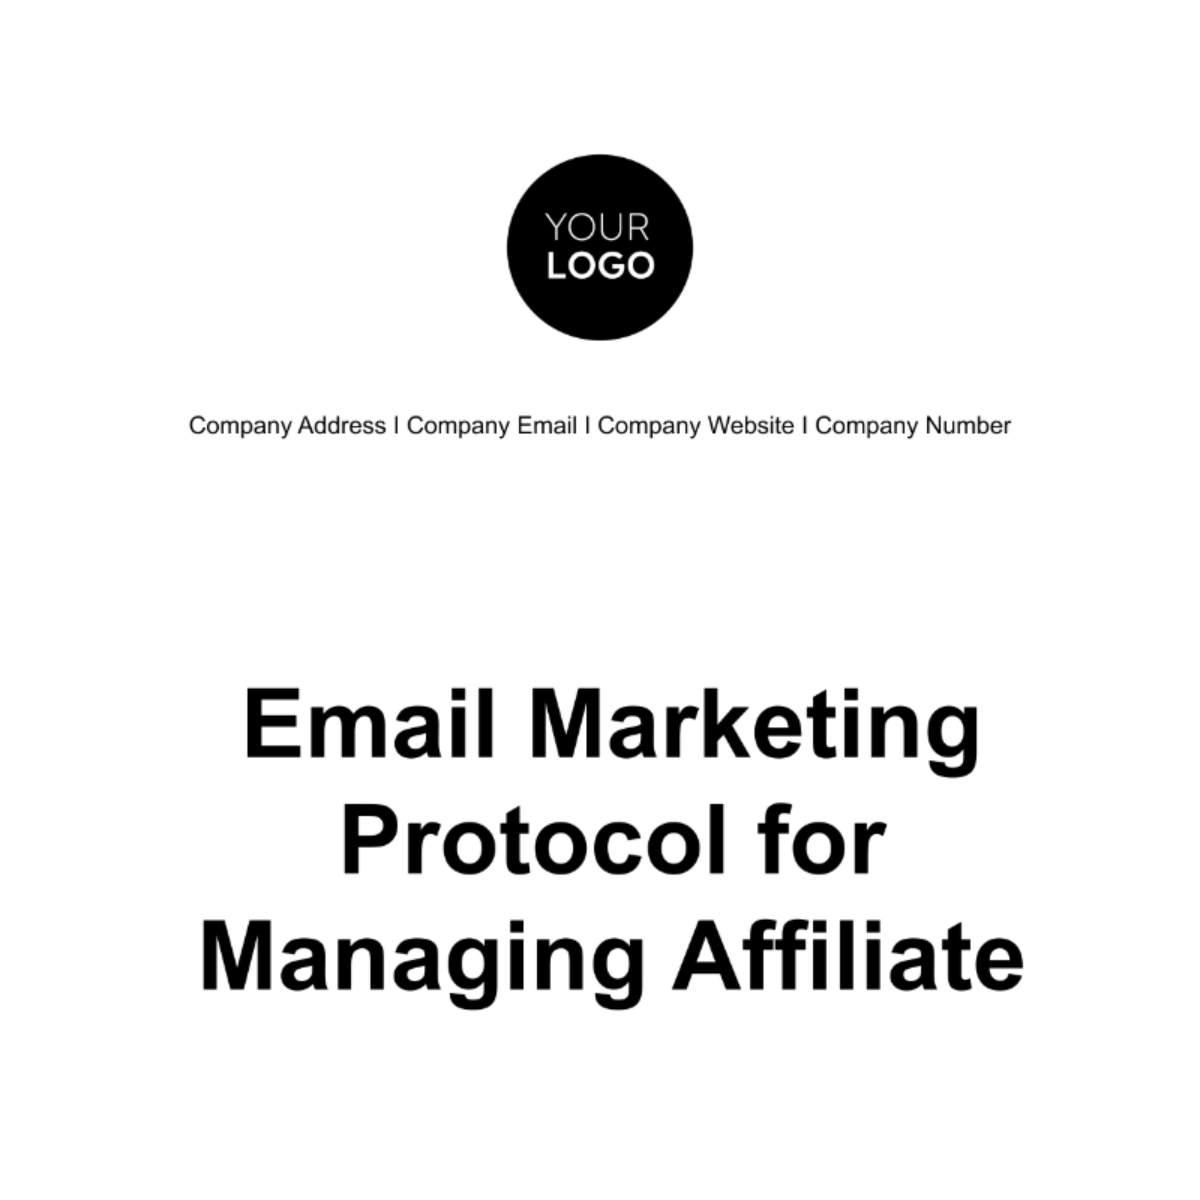 Email Marketing Protocol for Managing Affiliate Template